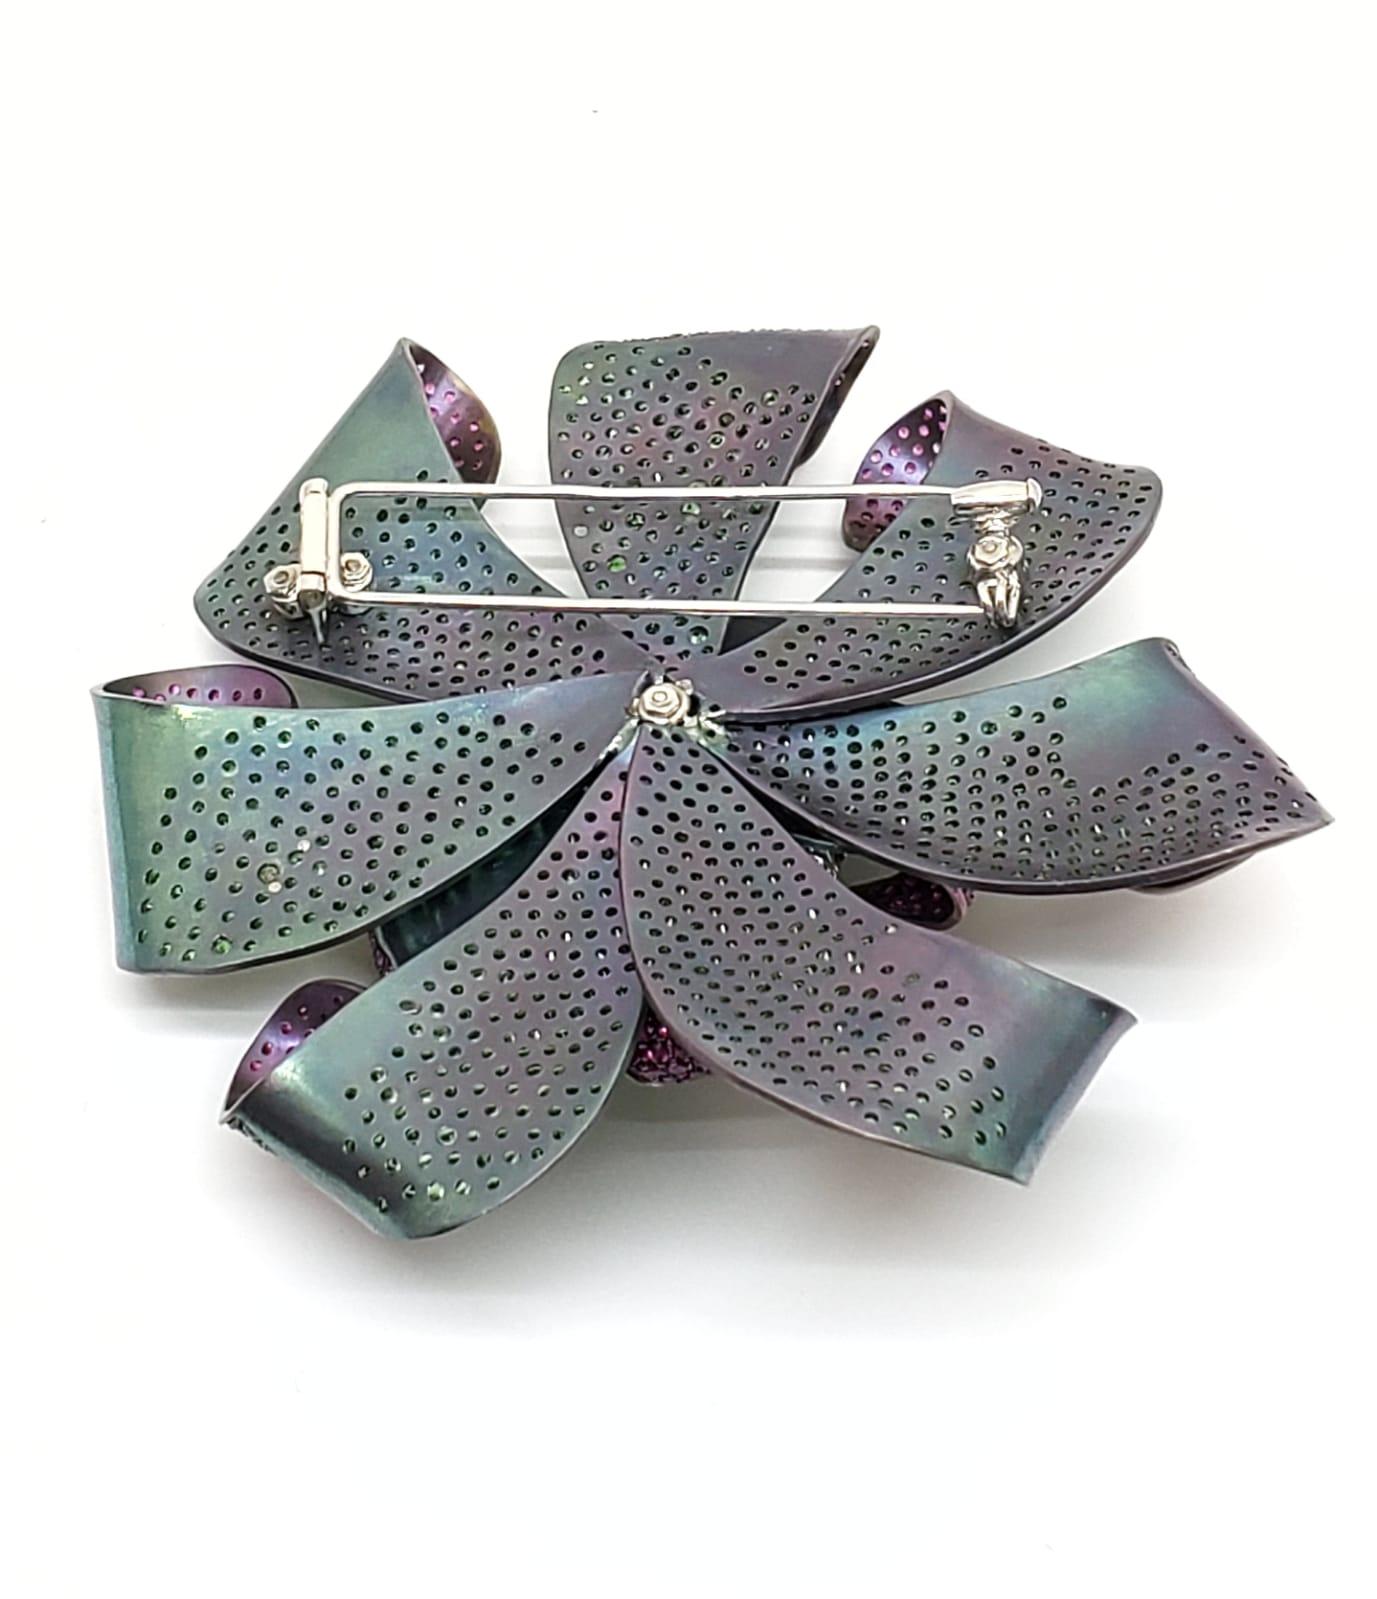 Andreoli Colombian Emerald Pink Sapphire Tsavorite Flower Brooch Diamond Titanium Pin. Andreoli was one of the first jewelry creators to utilize titanium in high jewelry over 18KT or Platinum. The use of titanium allows for bigger and bolder designs